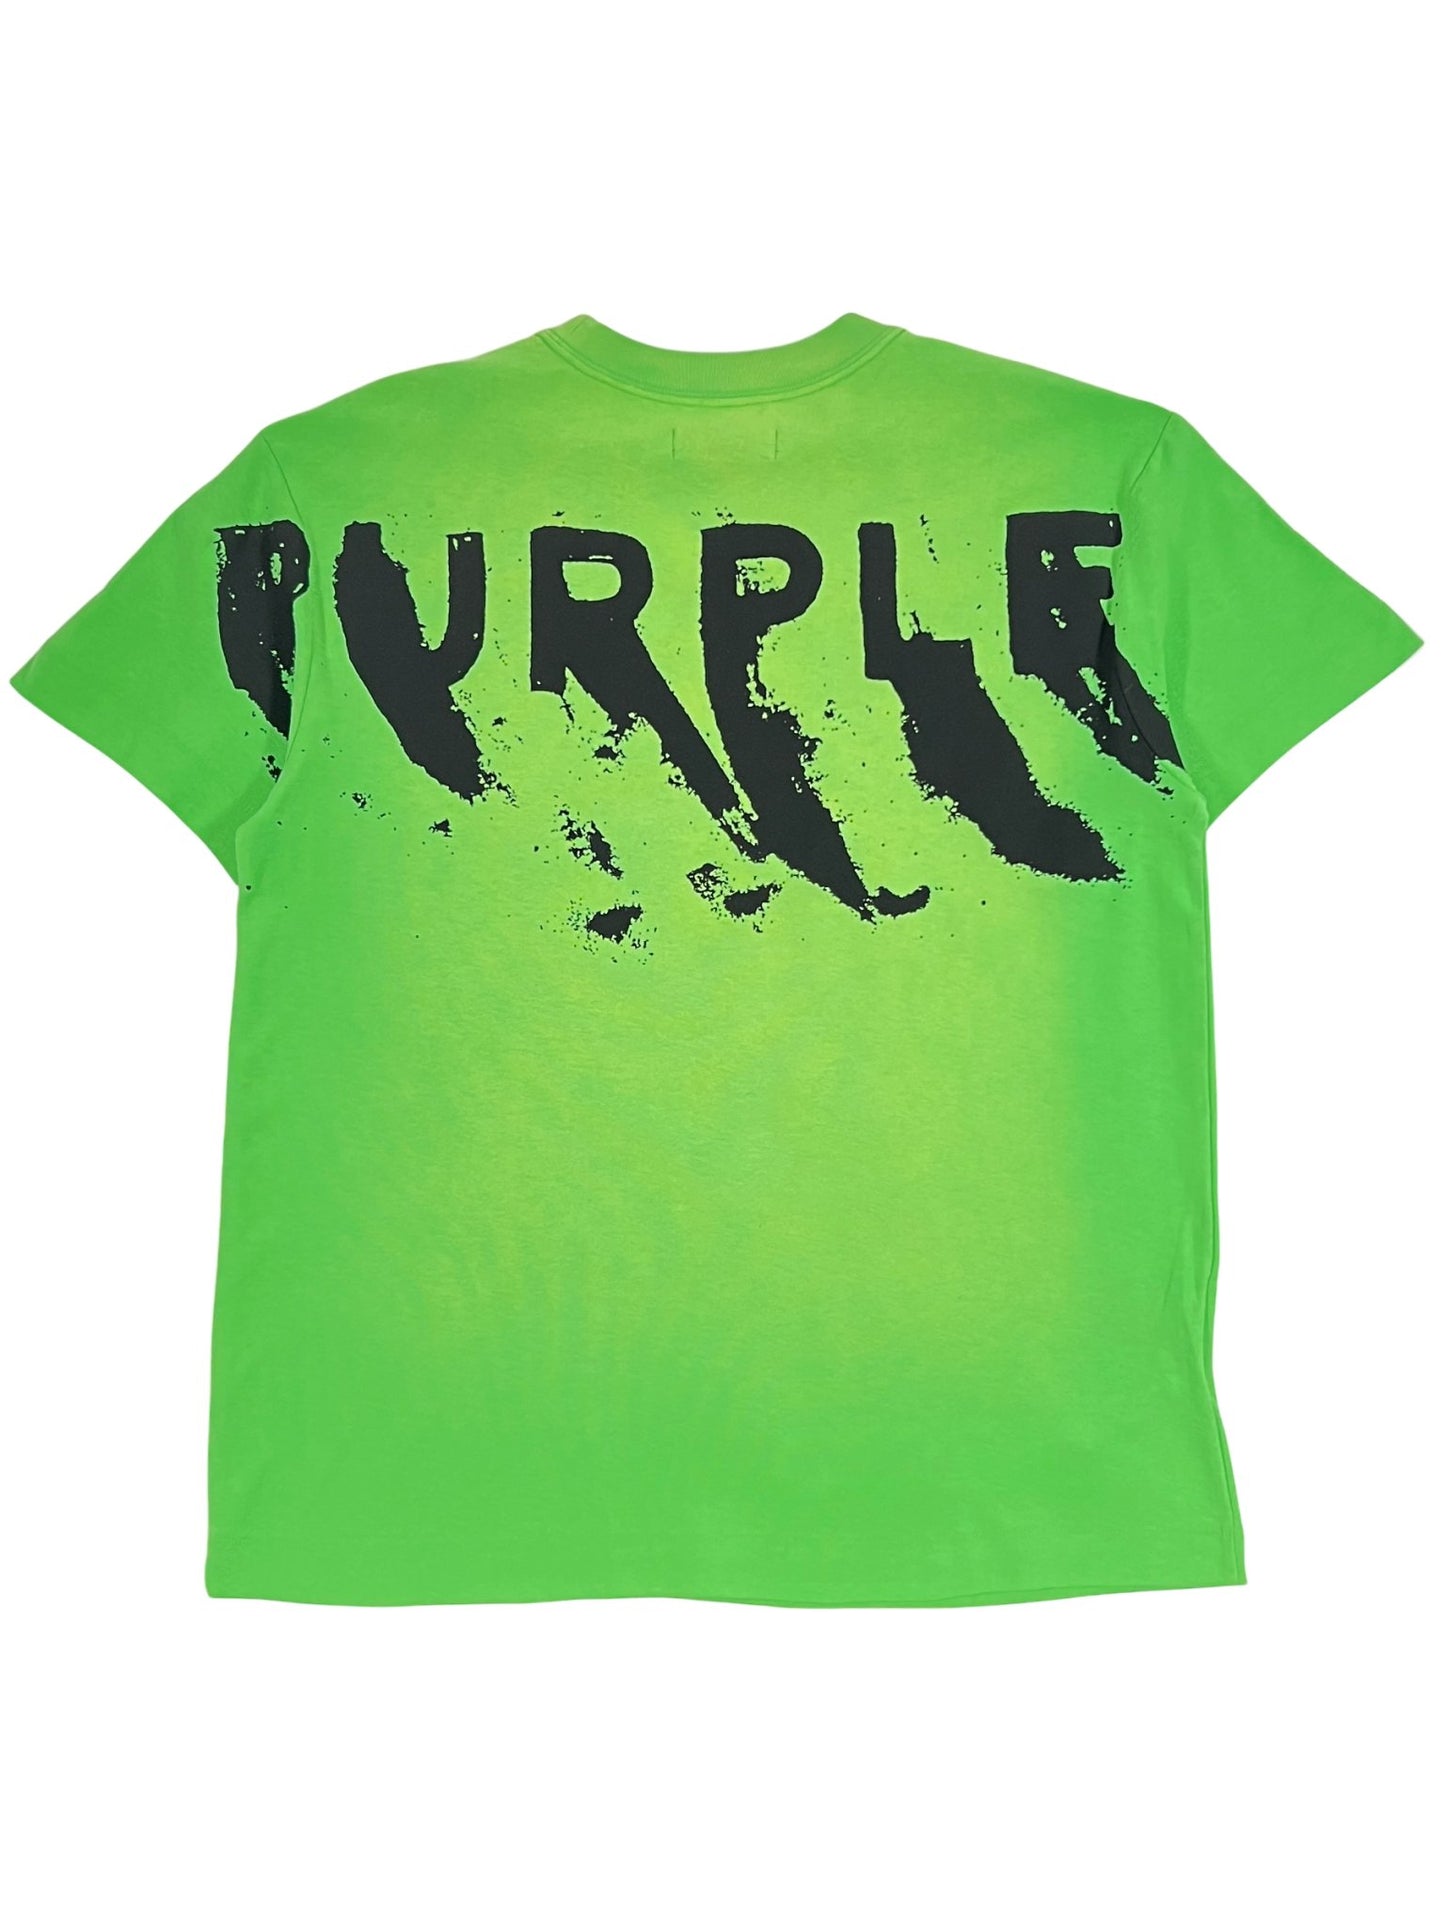 A PURPLE BRAND P104-TJFL TEXTURED JERSEY SS TEE GREEN with the word "purple" printed in black on the back.